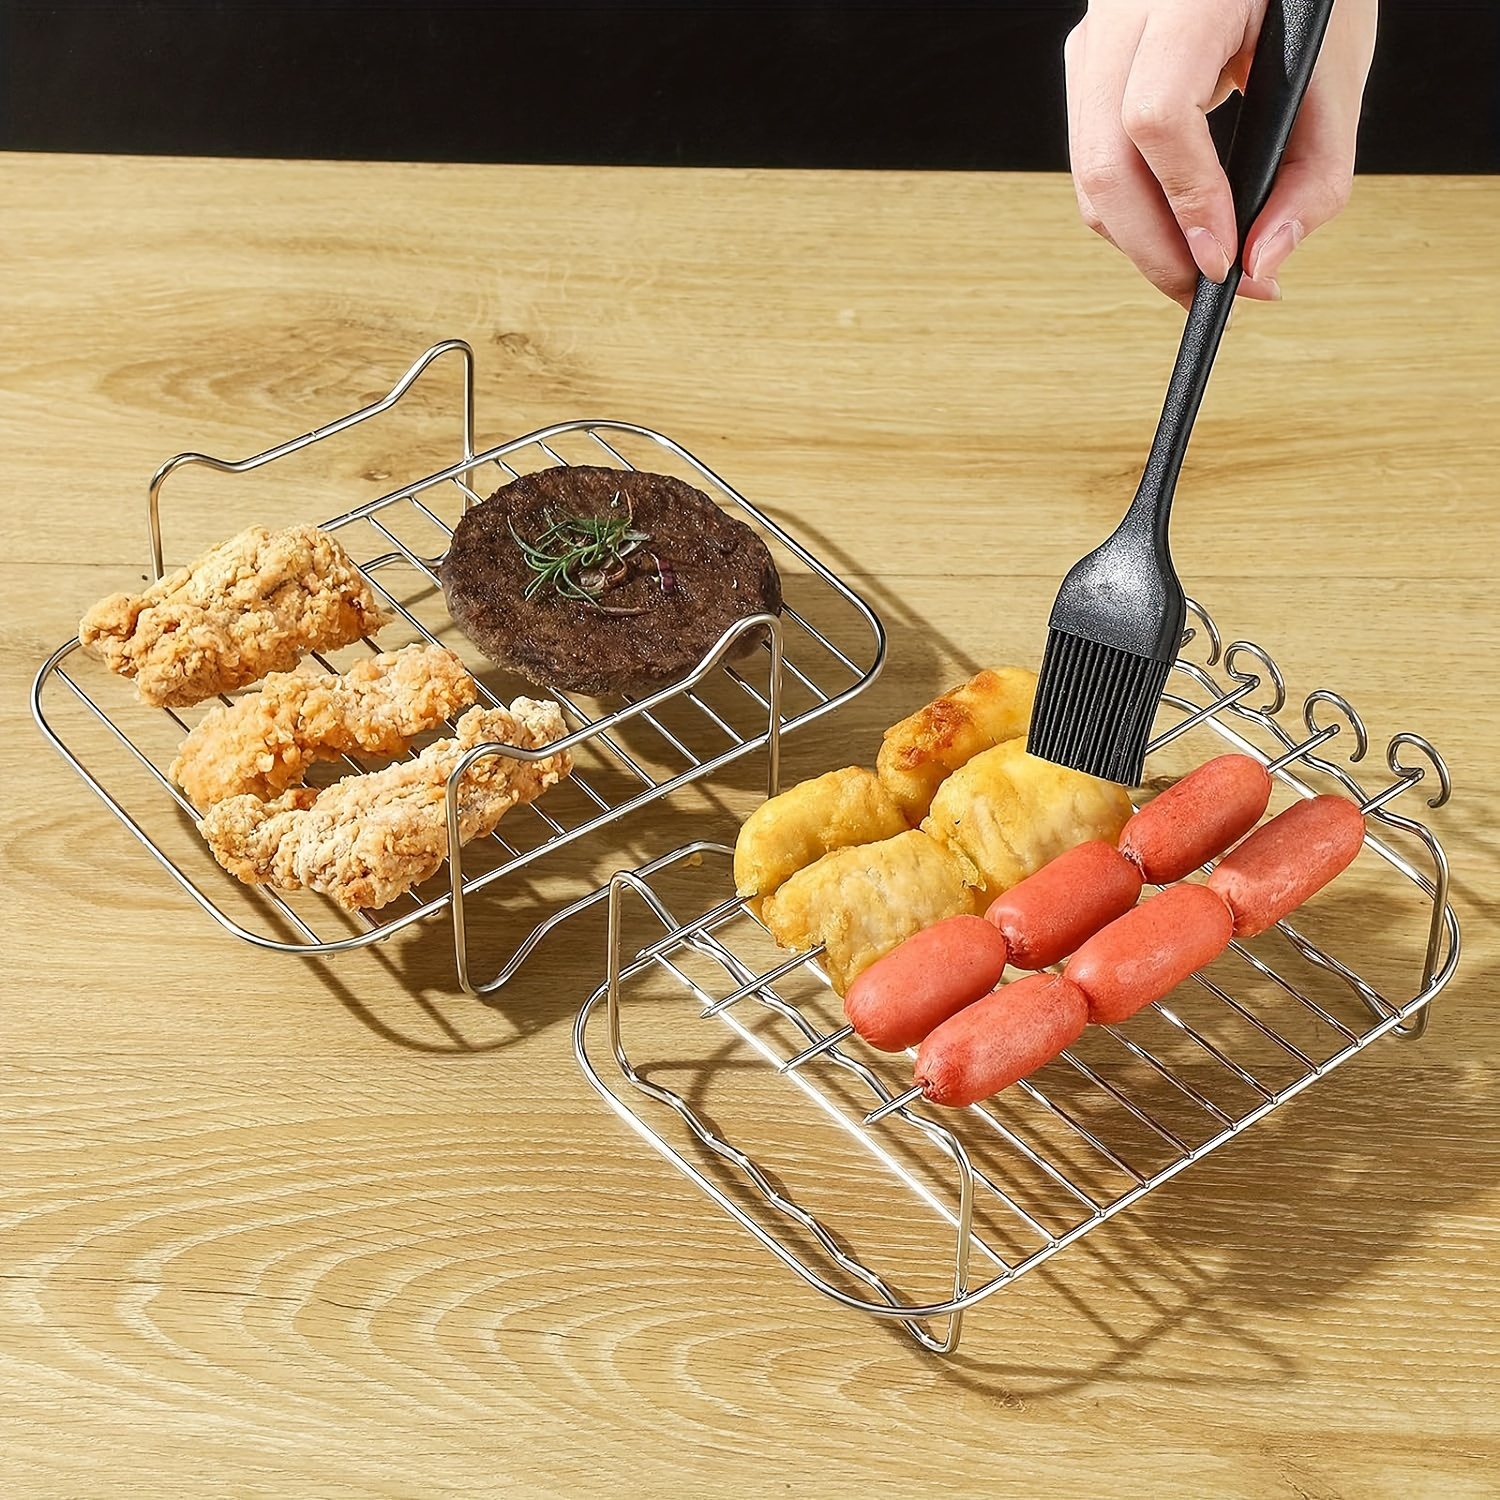 Stainless Steel Air Fryer Accessories with 4 Barbecue Sticks Set Of 2  Non-stick Air Fryer Rack Multipurpose Double Layer Rack Metal Bread Holder  for Most 3.7Qt-4.2Qt Air Fryers Ovens 